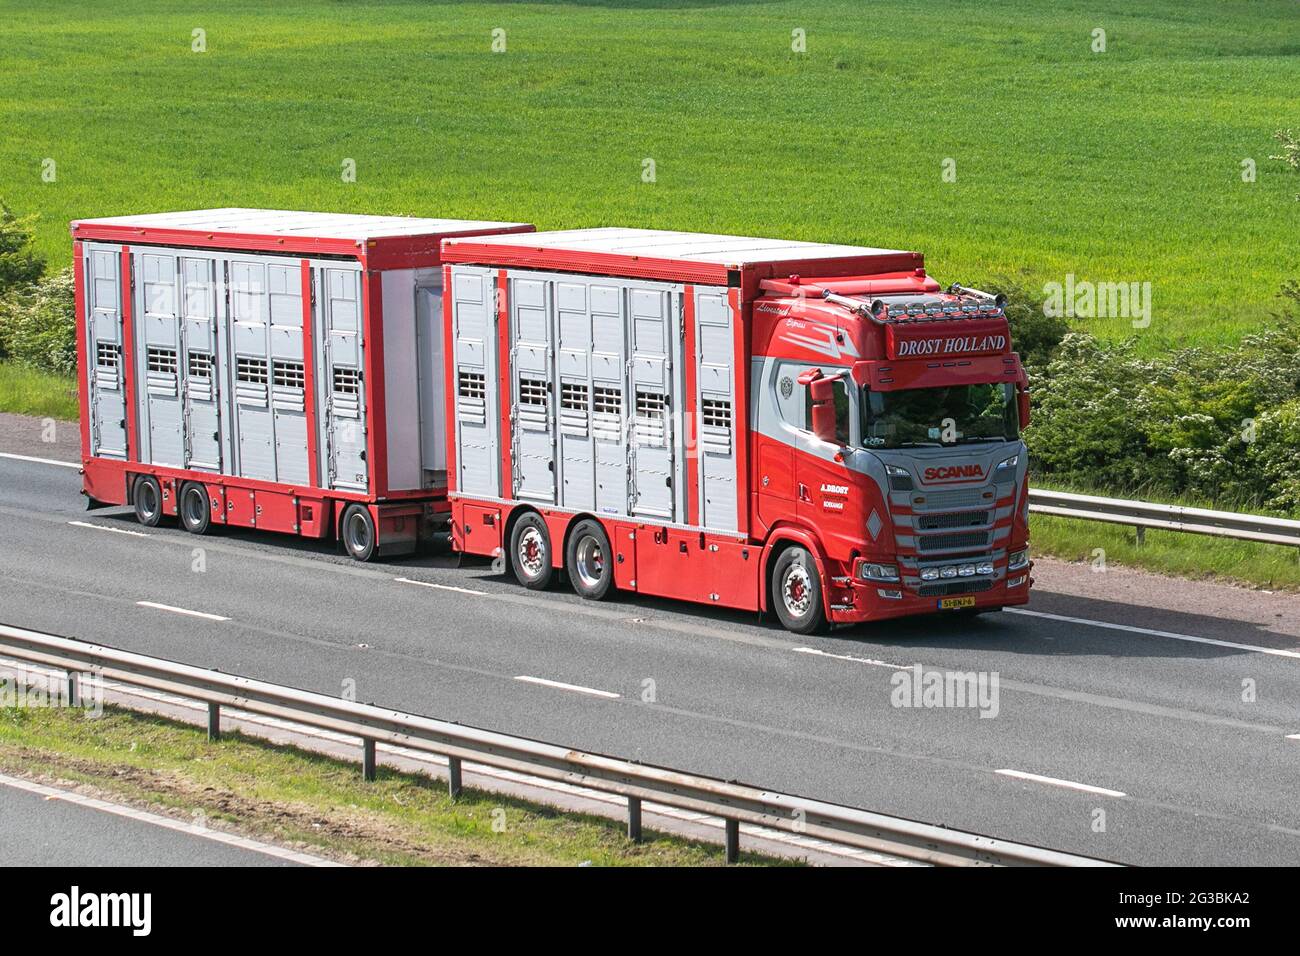 Drost Veetransport Holland livestock Express, red 3axle Scania vehicle with trailer on the M61 motorway, UK Stock Photo